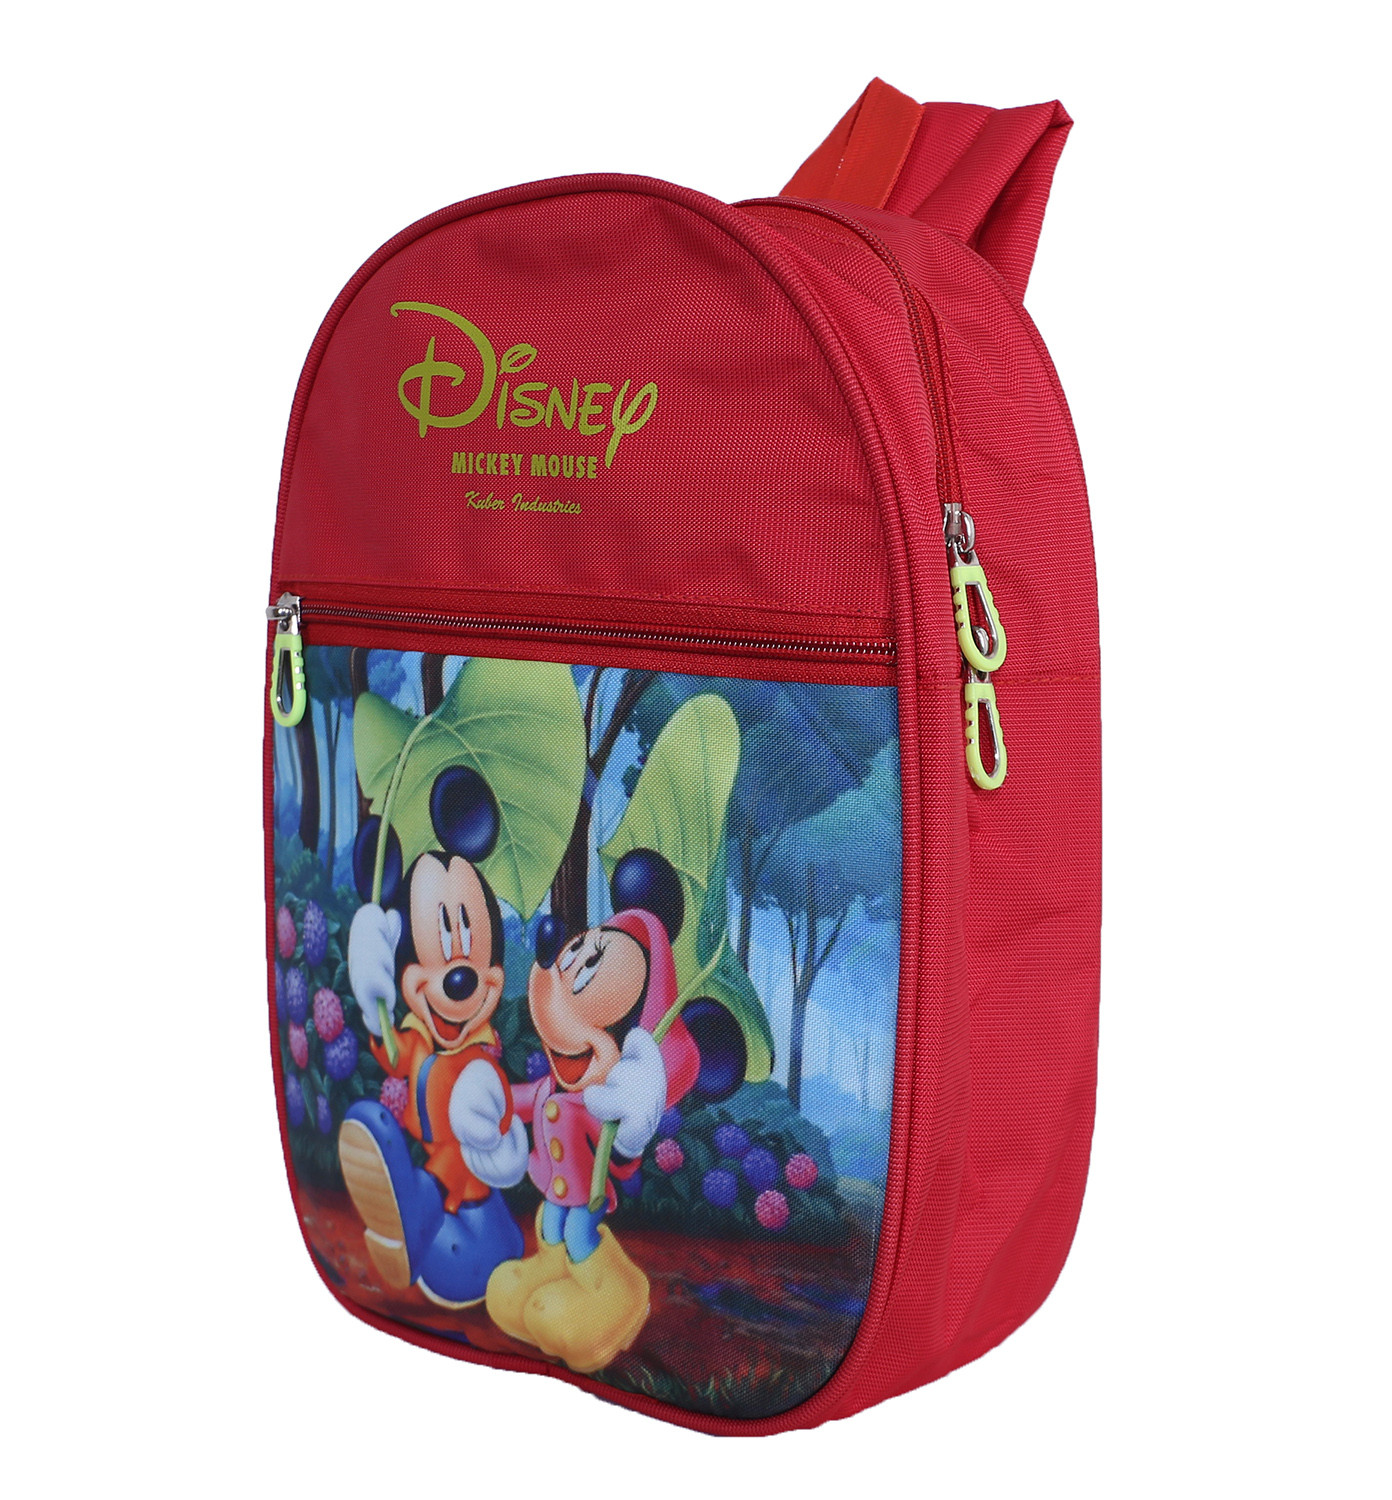 Kuber Industries Disney Mickey & Minnie School Bag|2 Compartment Rexine School Bagpack|School Bag for Kids|School Bags for Girls with Zipper Closure|Small Size (Red)